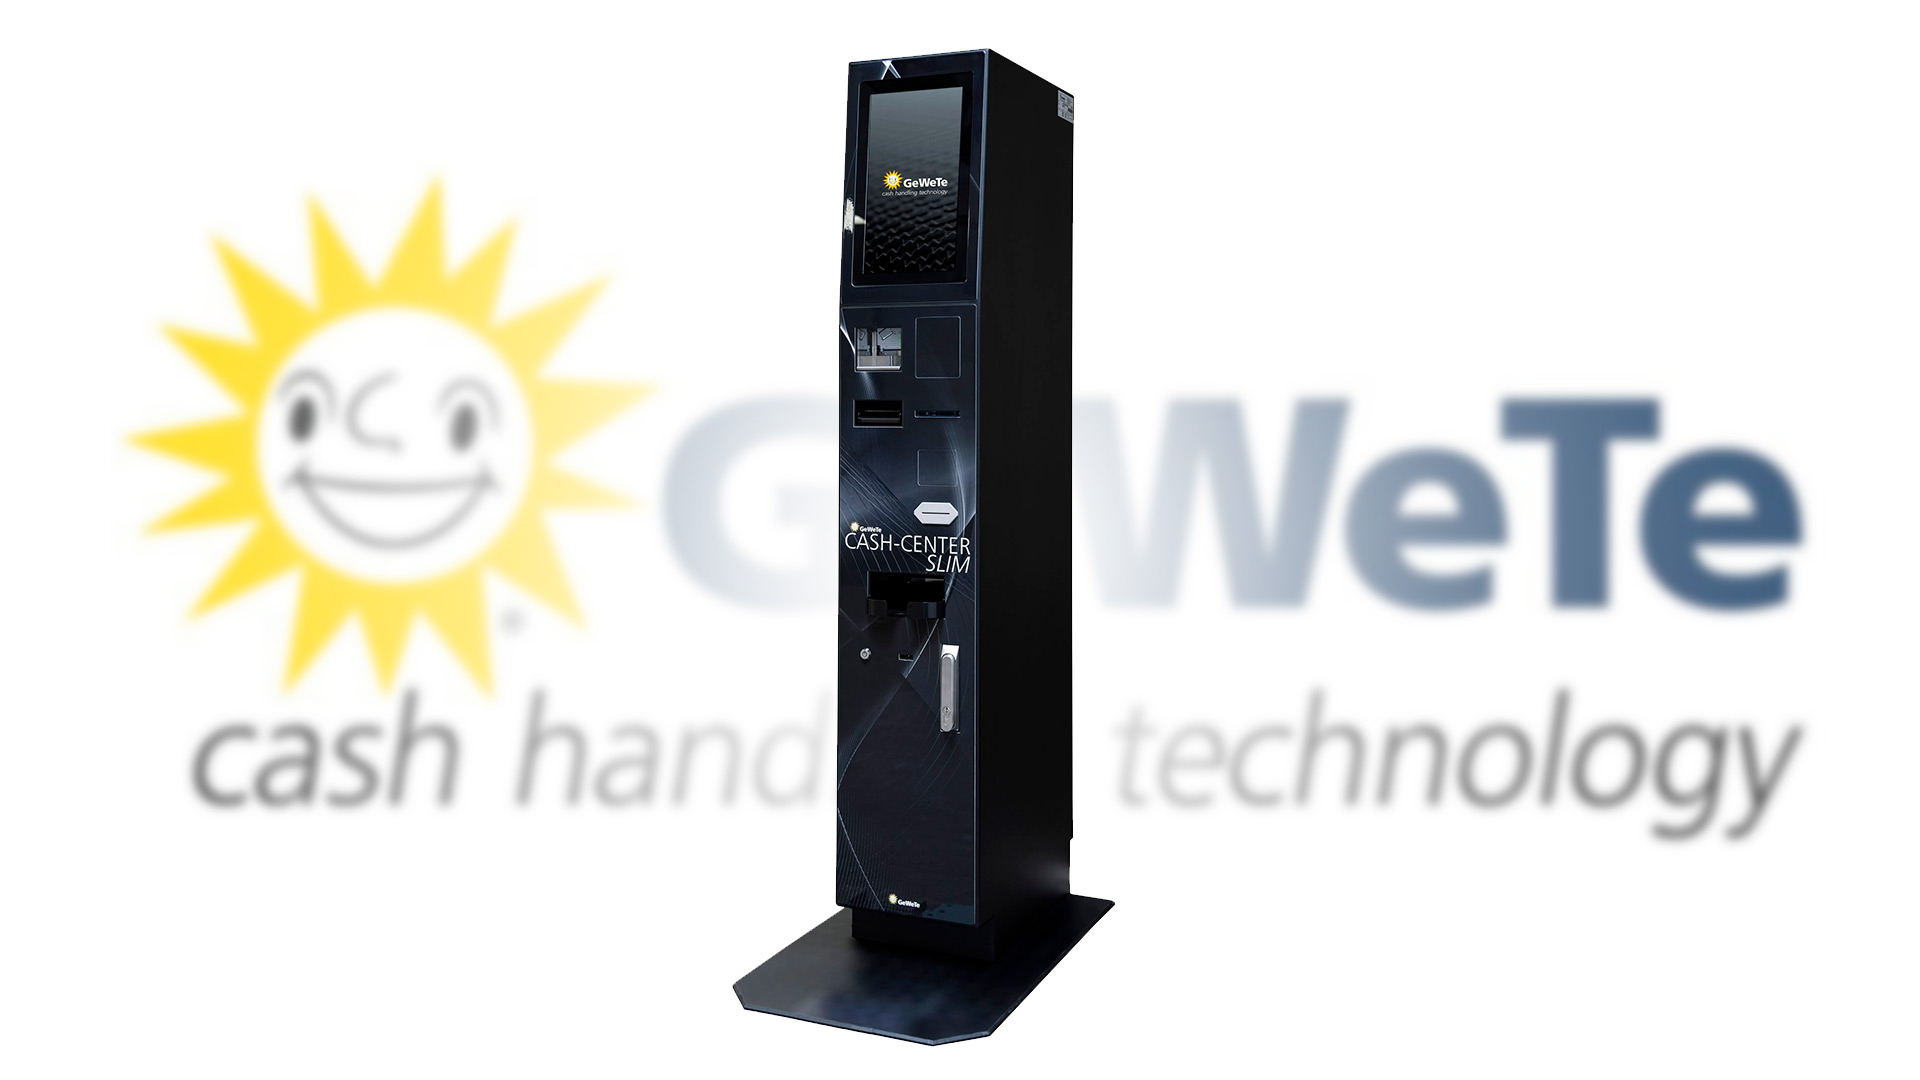 Gauselmann’s GeWeTe launches new, compact version of cash handling system